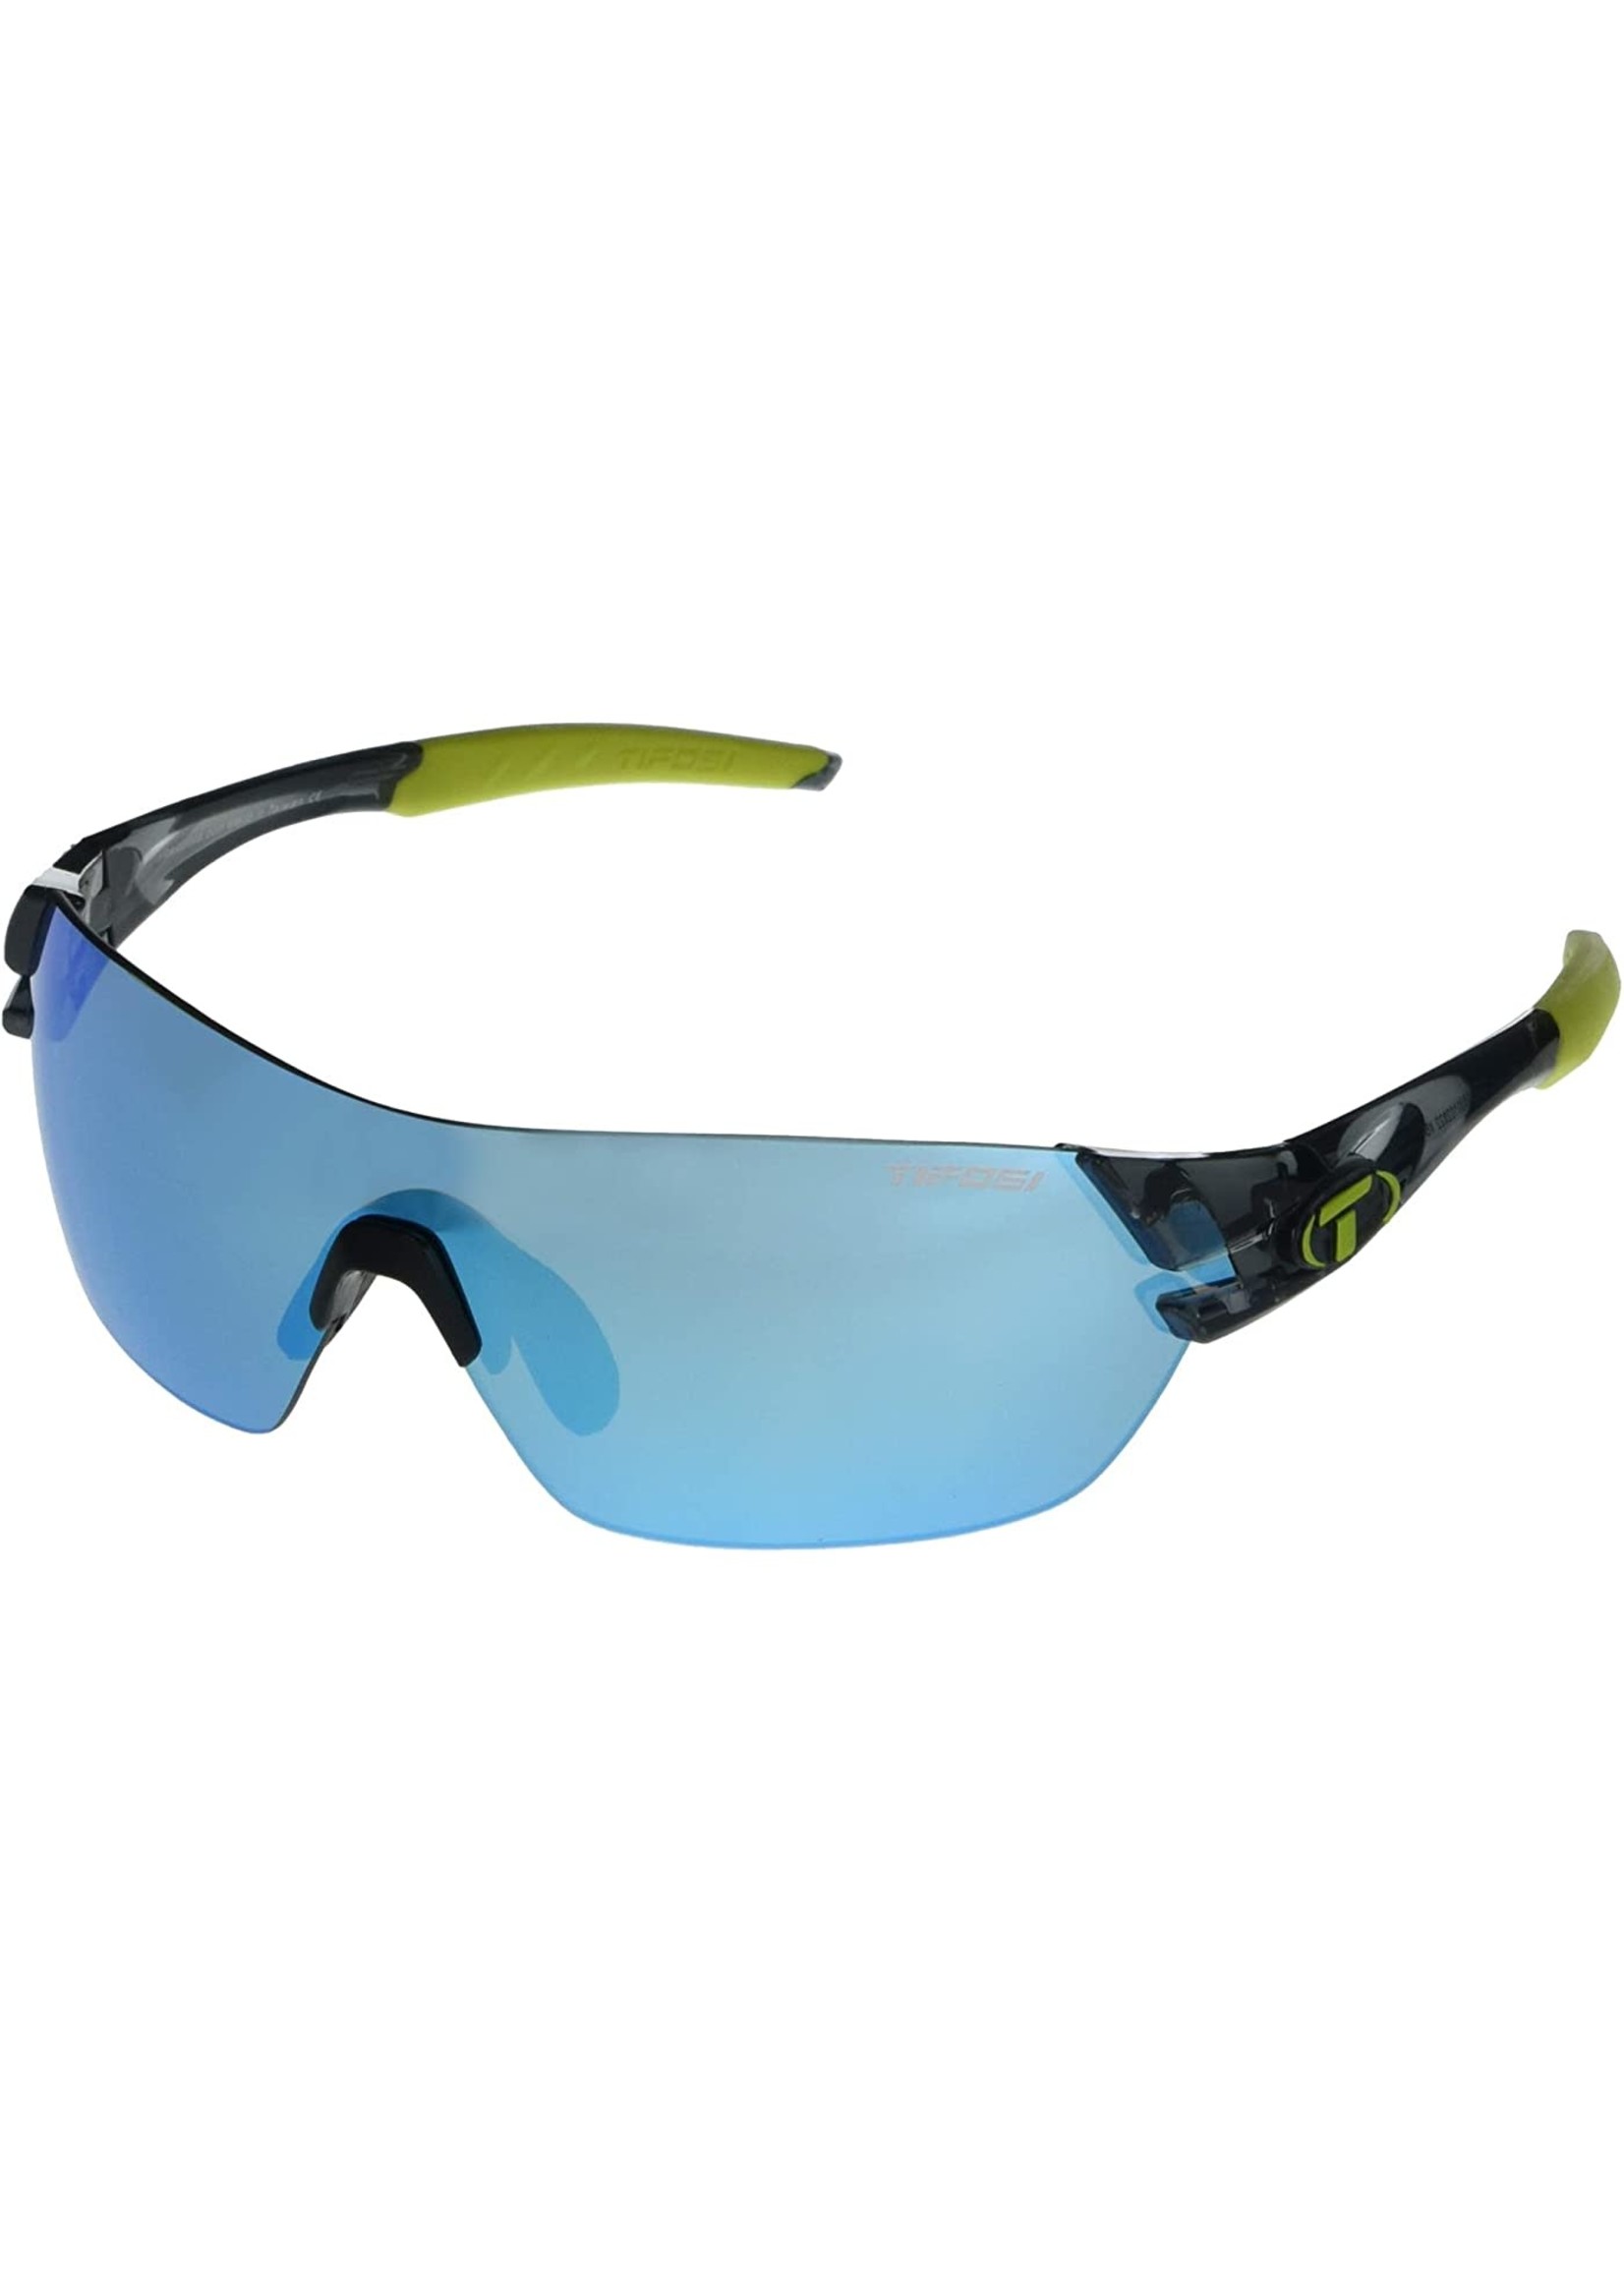 Tifosi Optics Slice, Crystal Smoke Interchangeable Sunglasses - Clarion Blue/AC Red/Clear